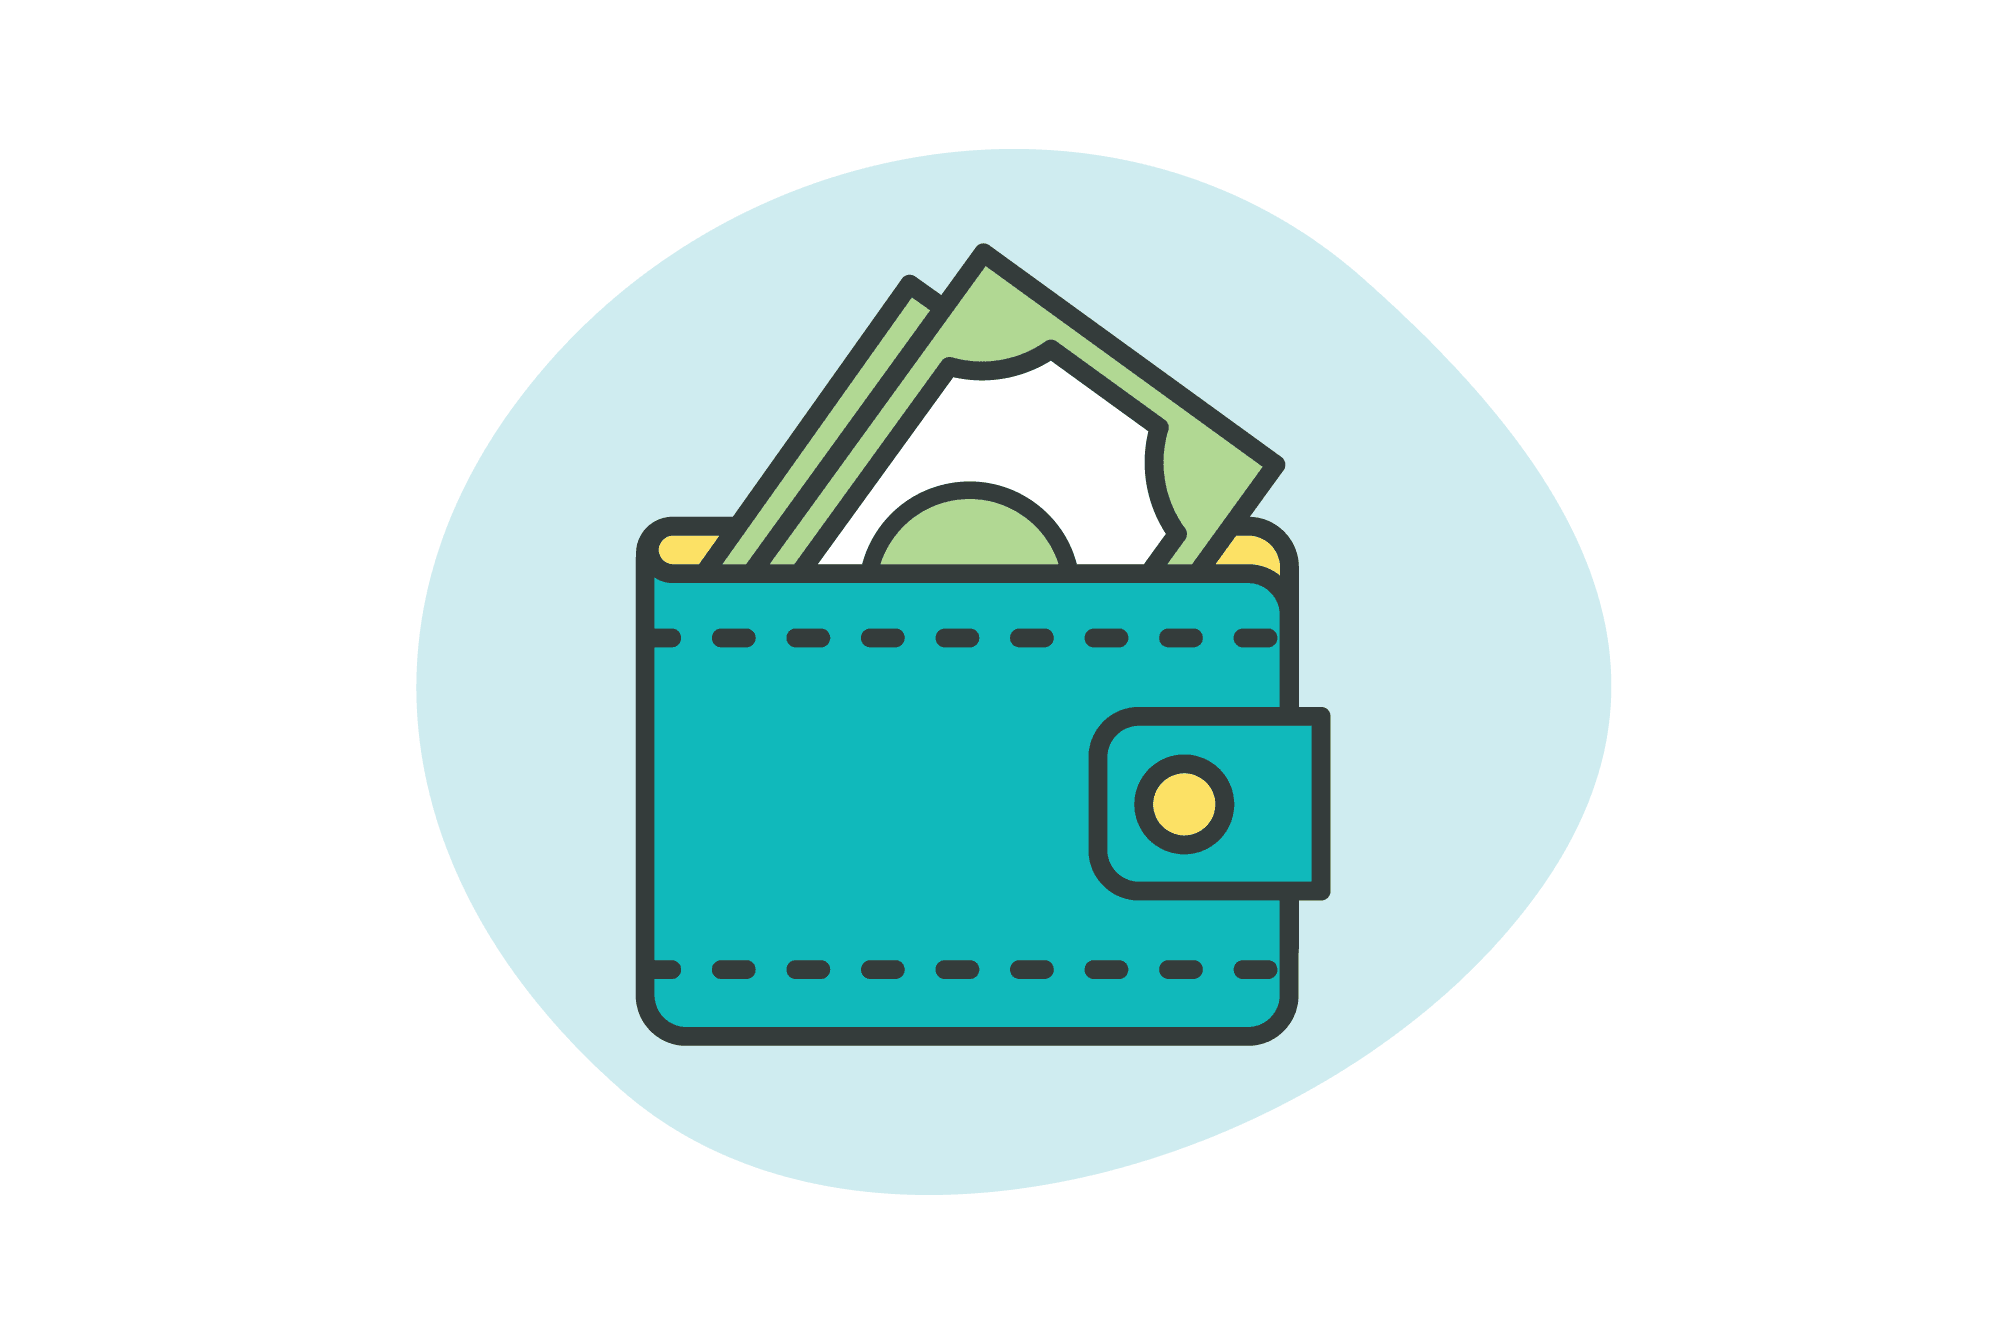 An illustration of a wallet with dollar bills poking out